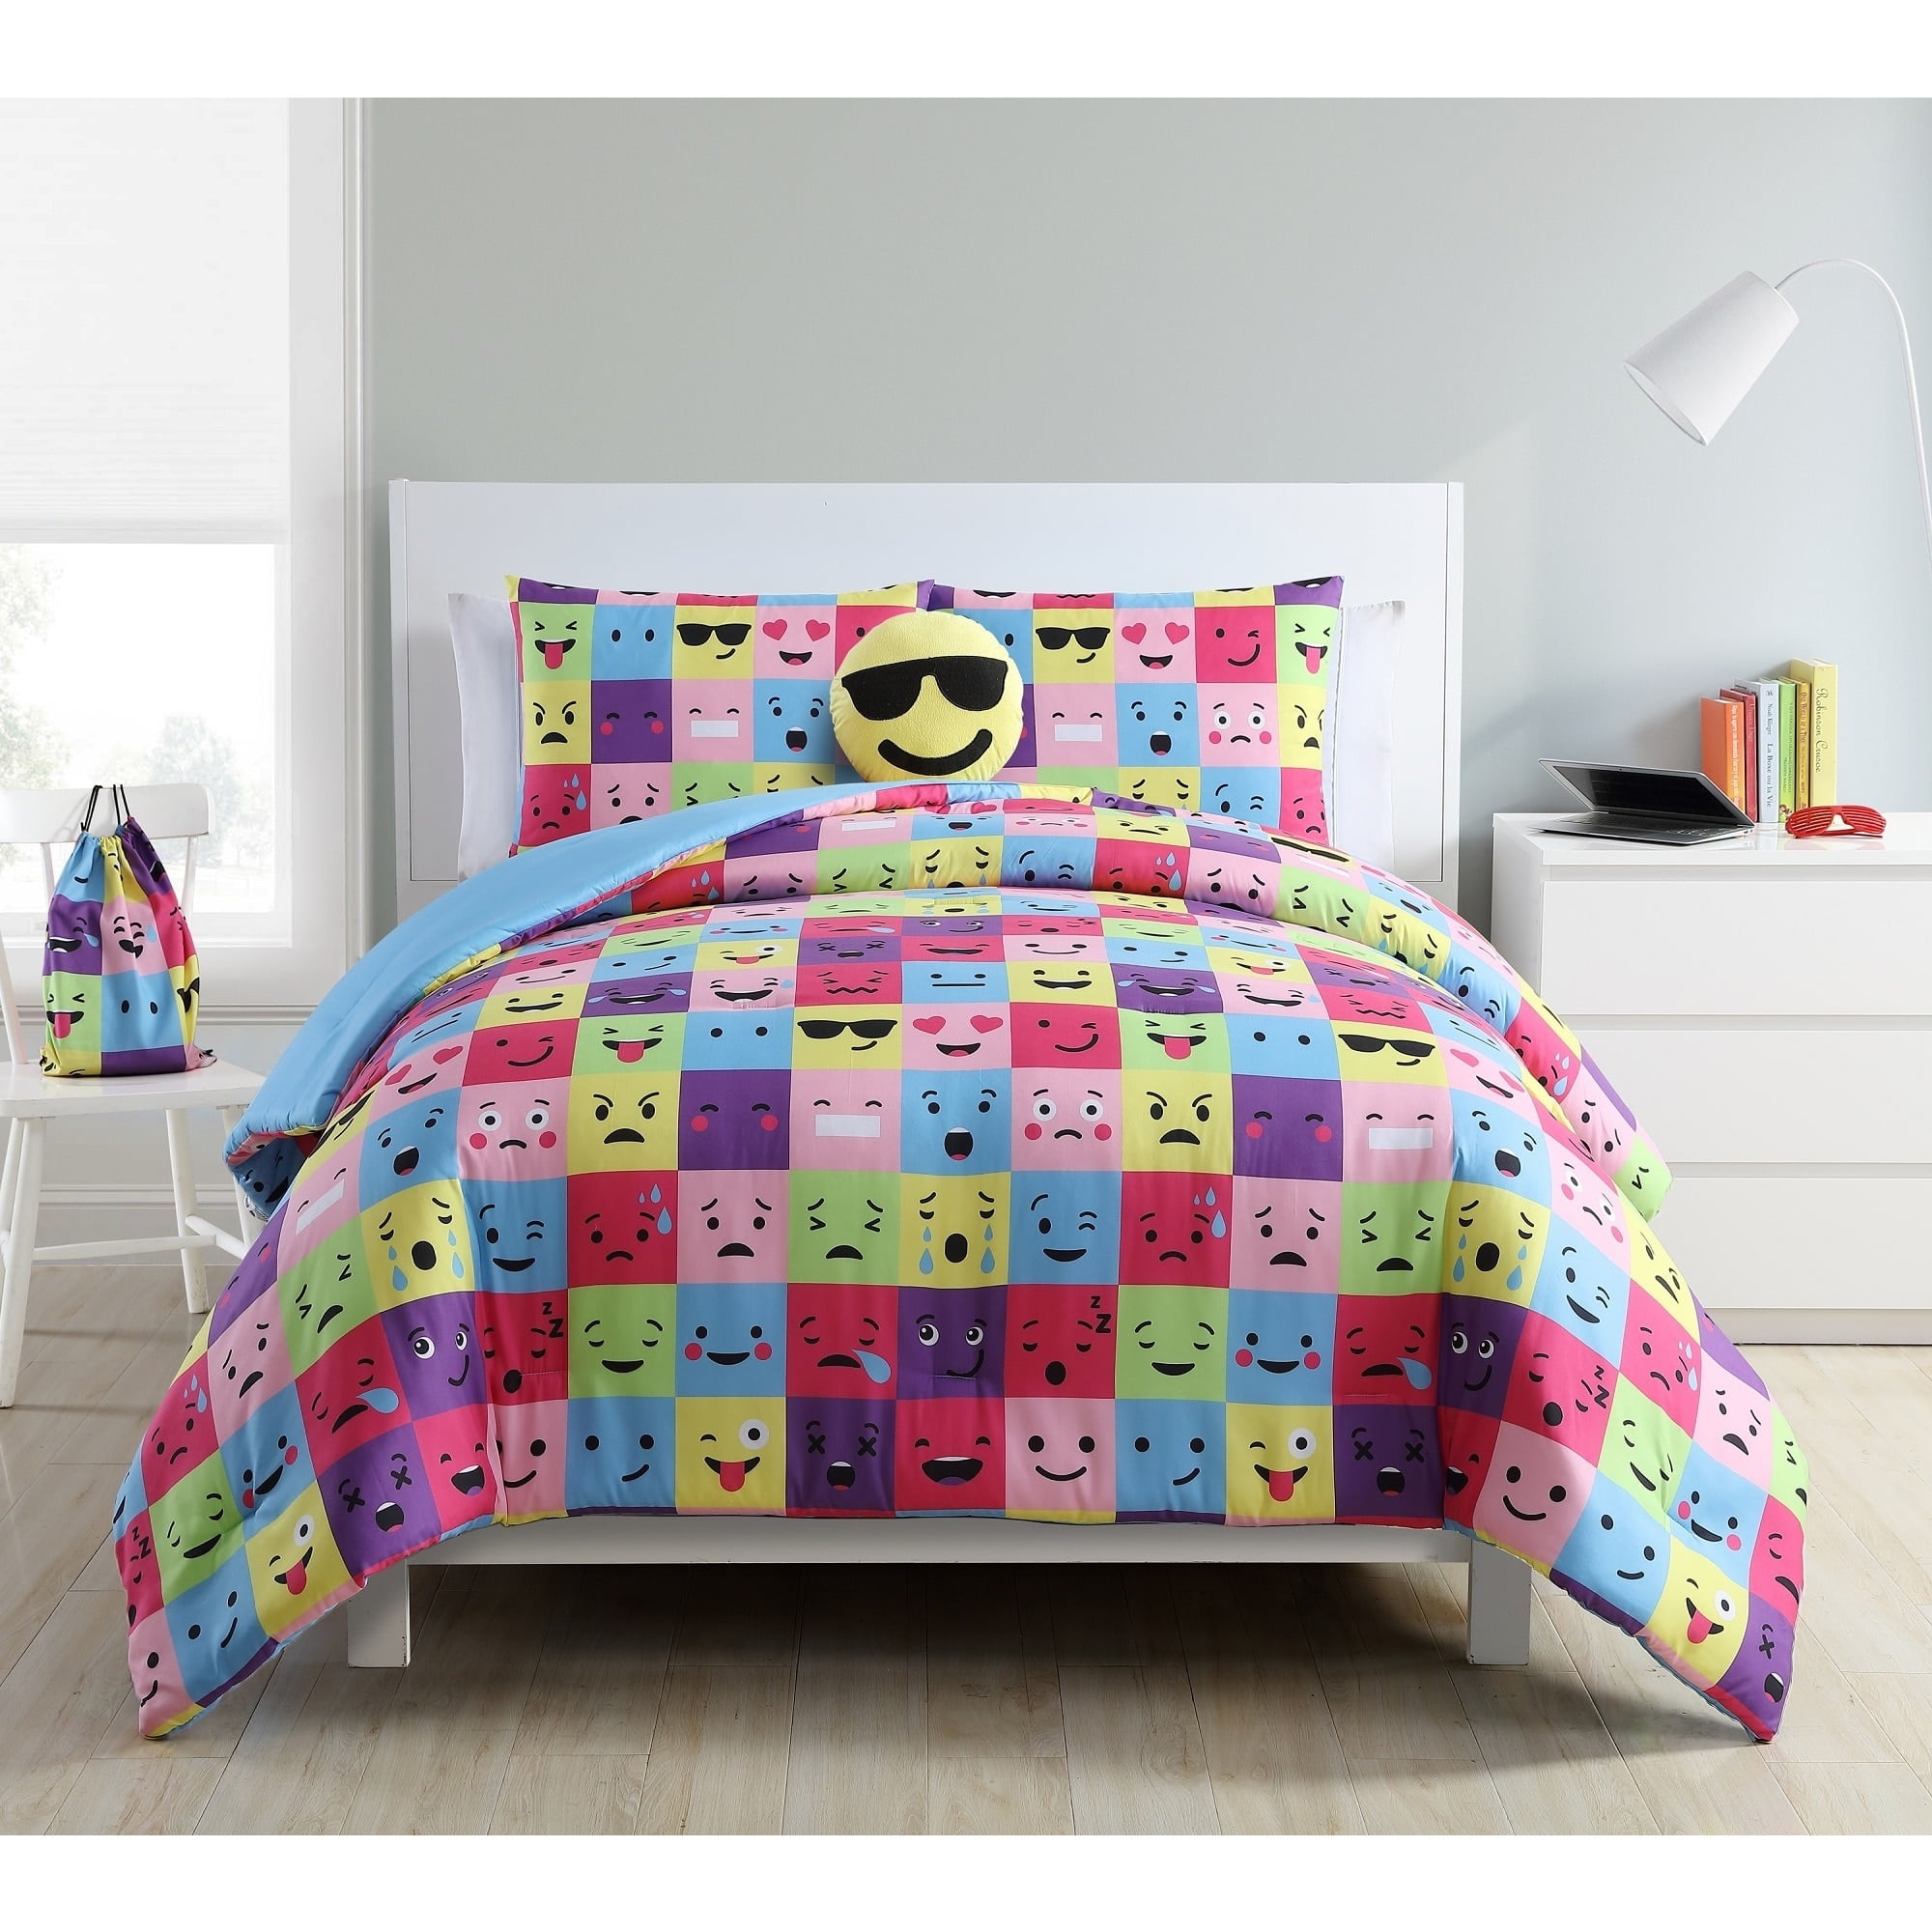 Discontinued Vcny Home Facey Square Emoji Reversible Bed In A